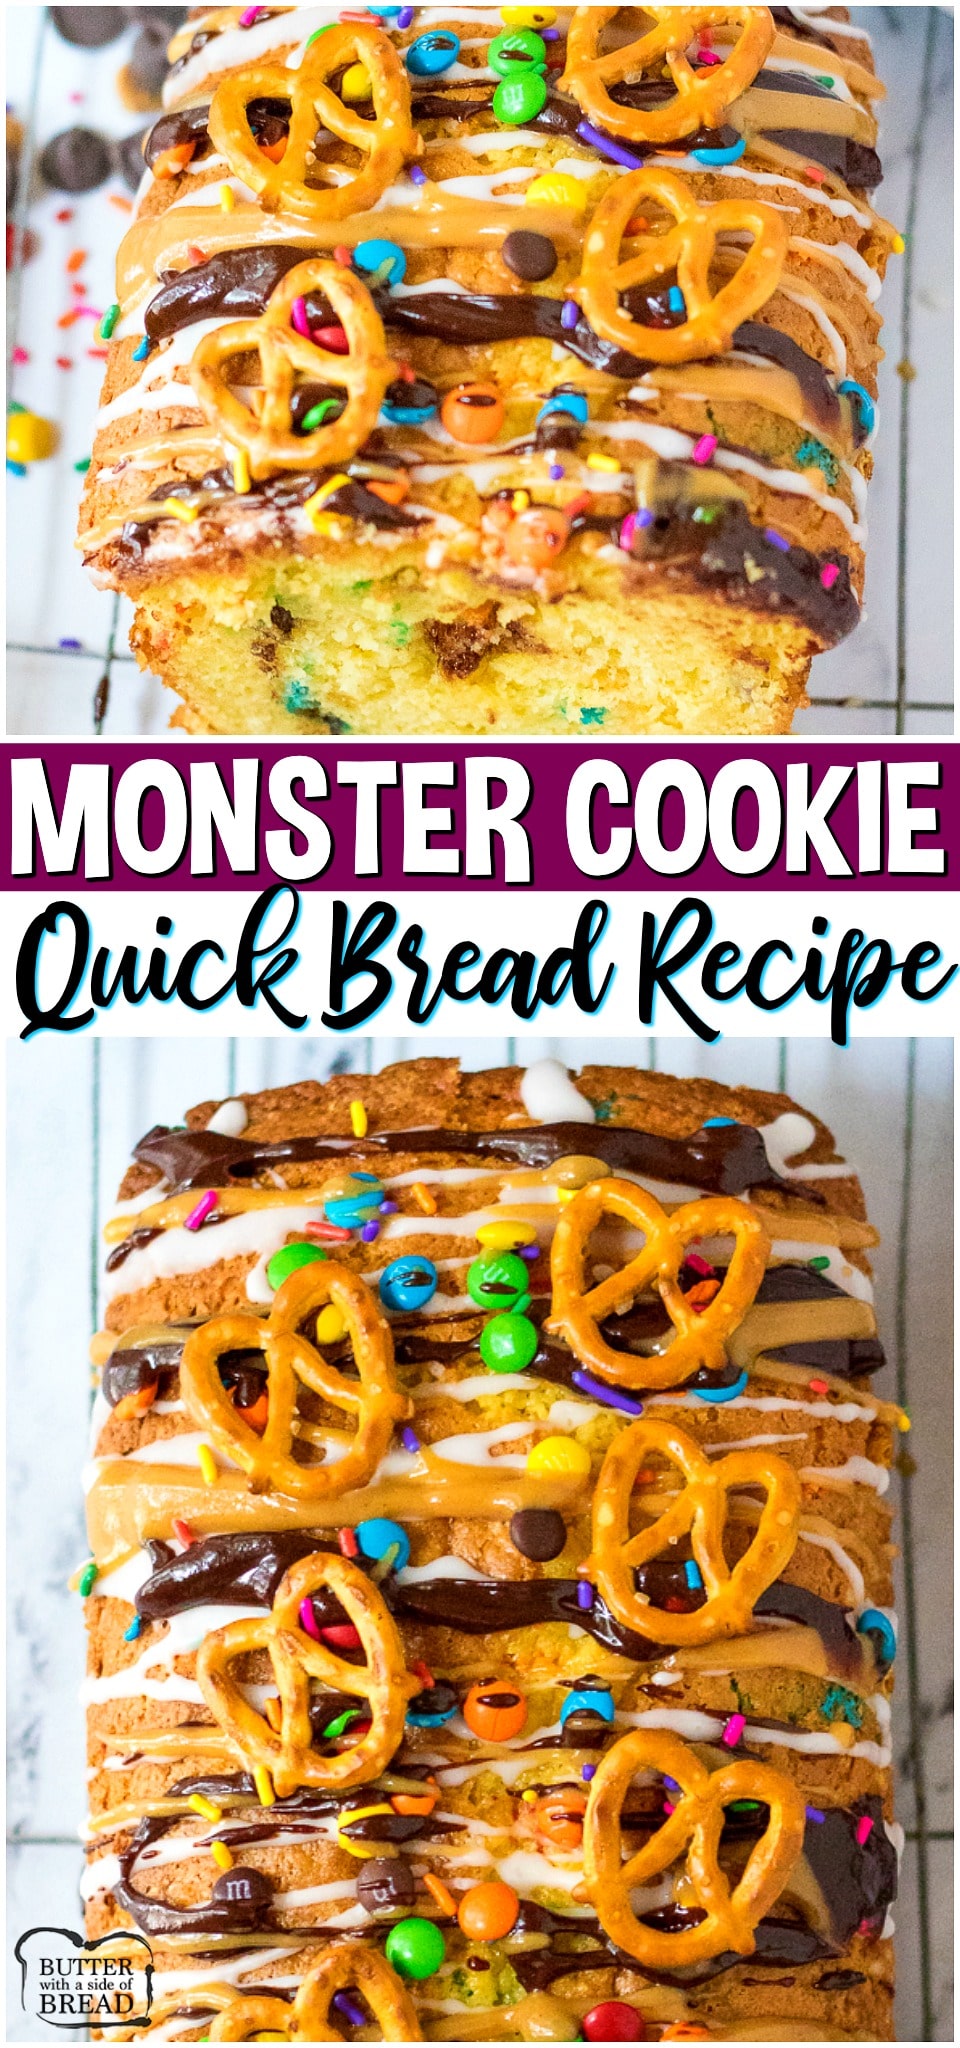 Monster Cookie Bread is everything you love about Monster Cookies, in bread form! Loaded sweet bread with chocolate & peanut butter chips, M&M's sprinkles and more! Wow your crowd with this over-the-top quick bread perfect for snack or dessert! #bread #sweet #quickbread #monster #monstercookie #chocolate #caramel #recipe from BUTTER WITH A SIDE OF BREAD